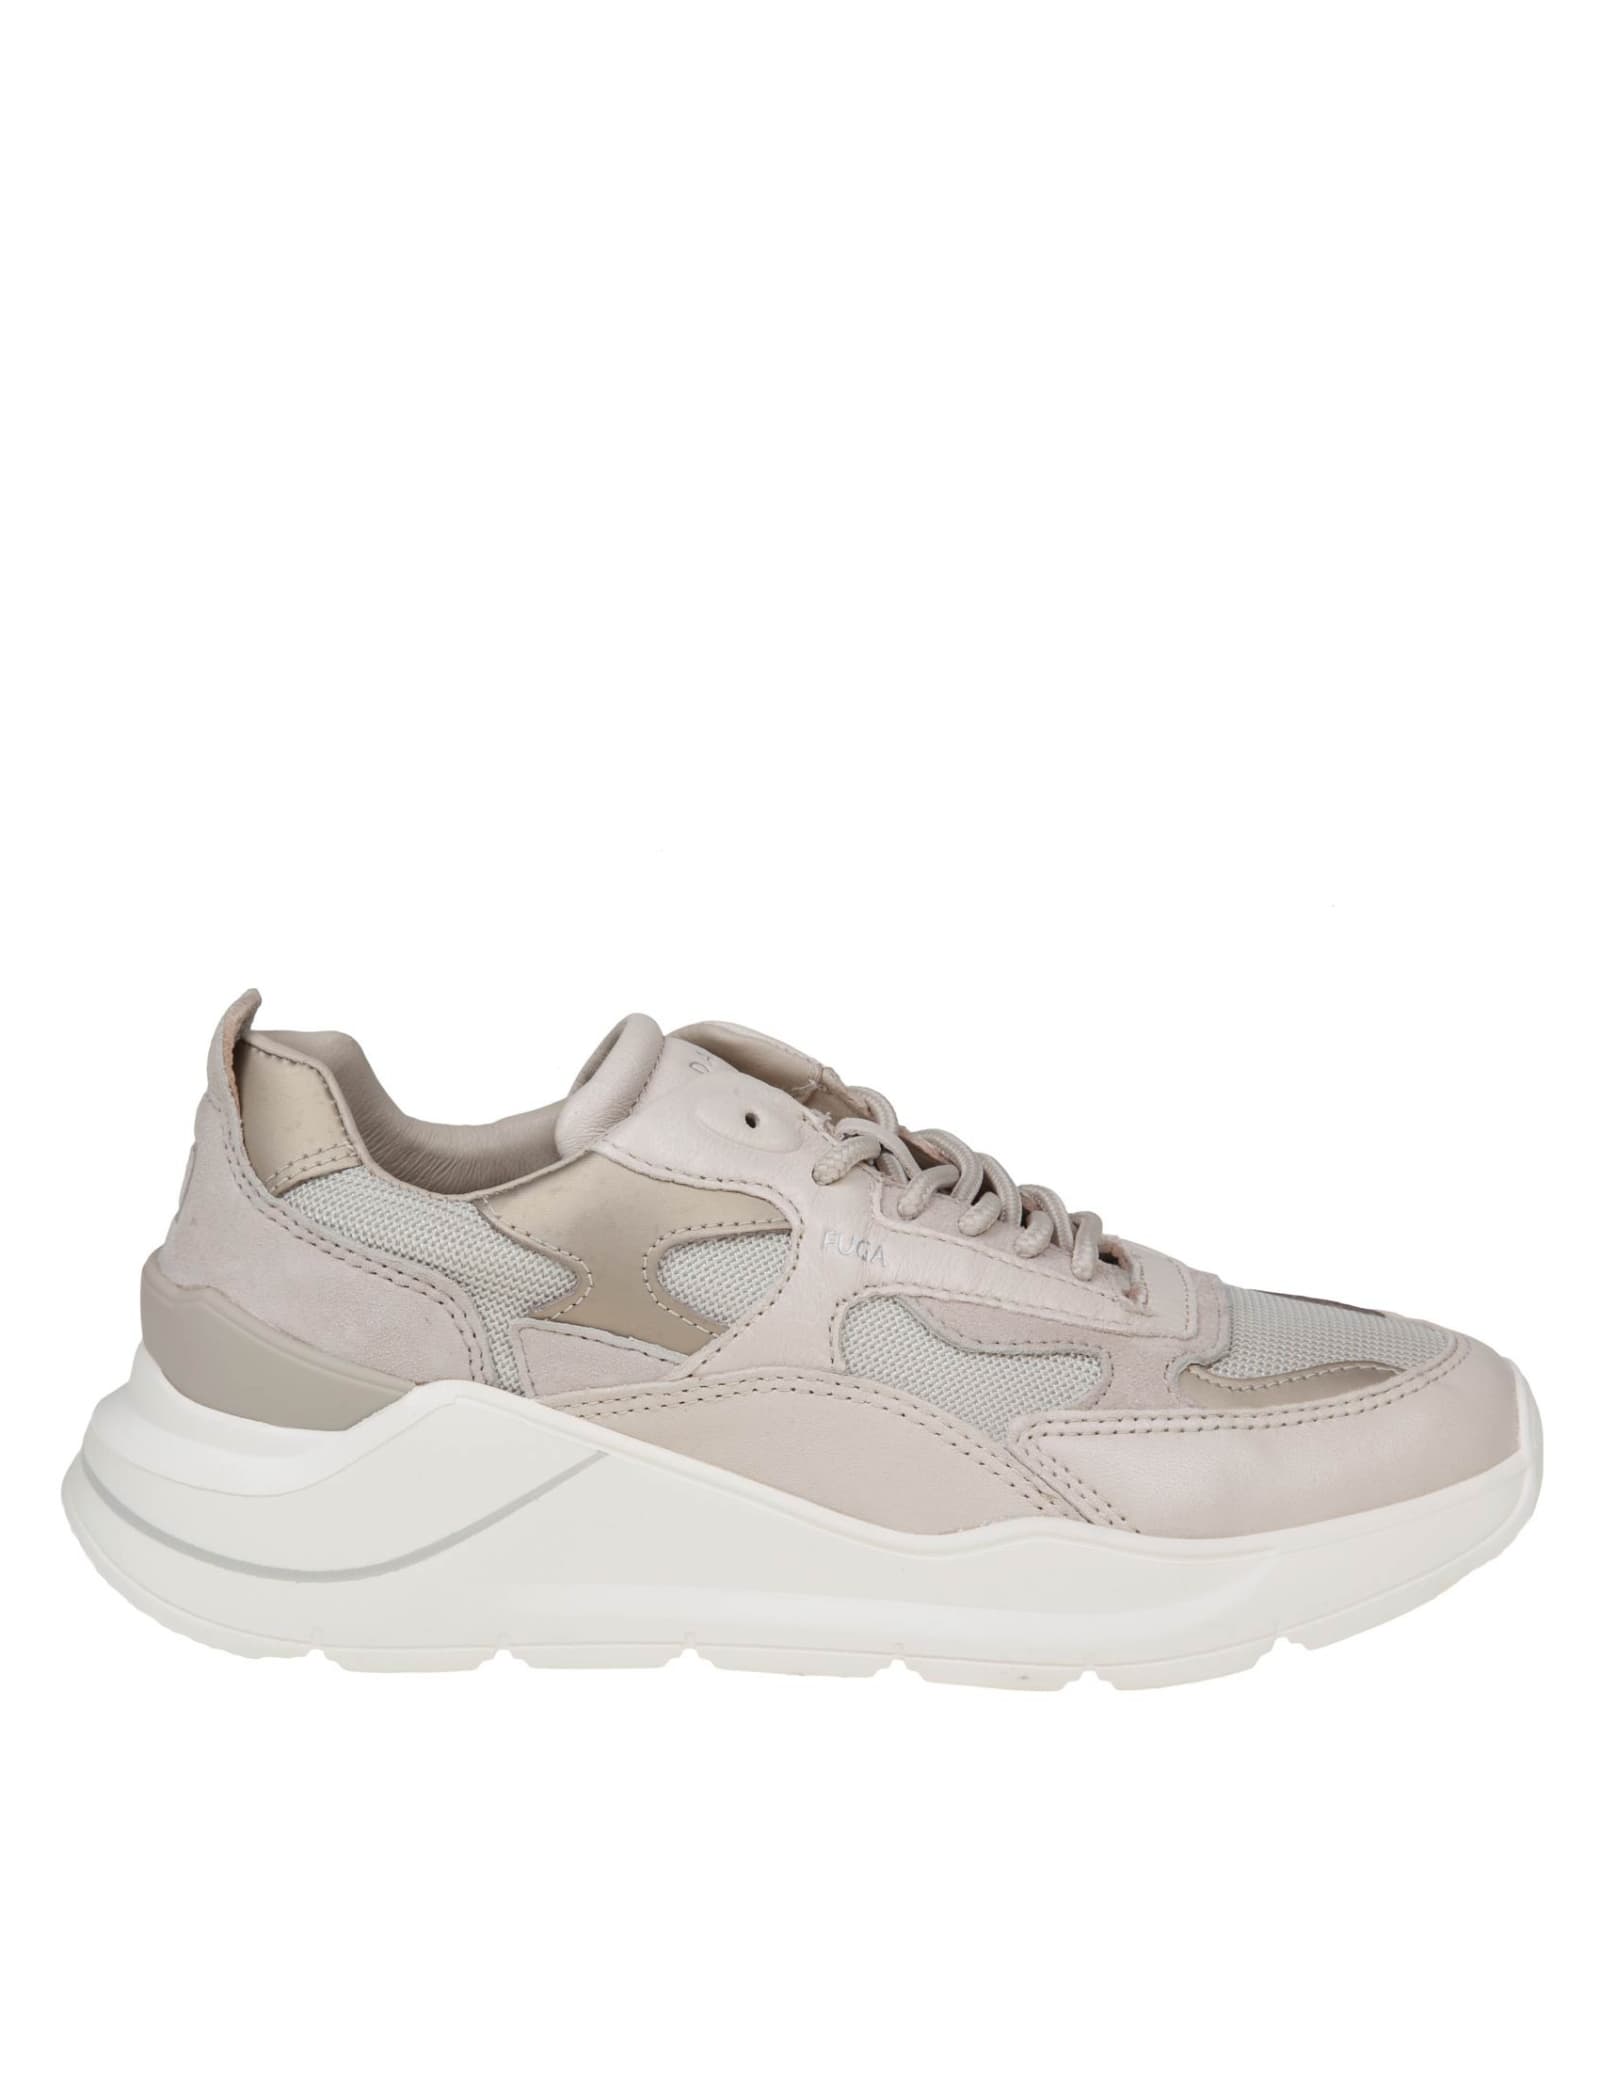 DATE FUGA MONO trainers IN LEATHER AND IVORY colour FABRIC